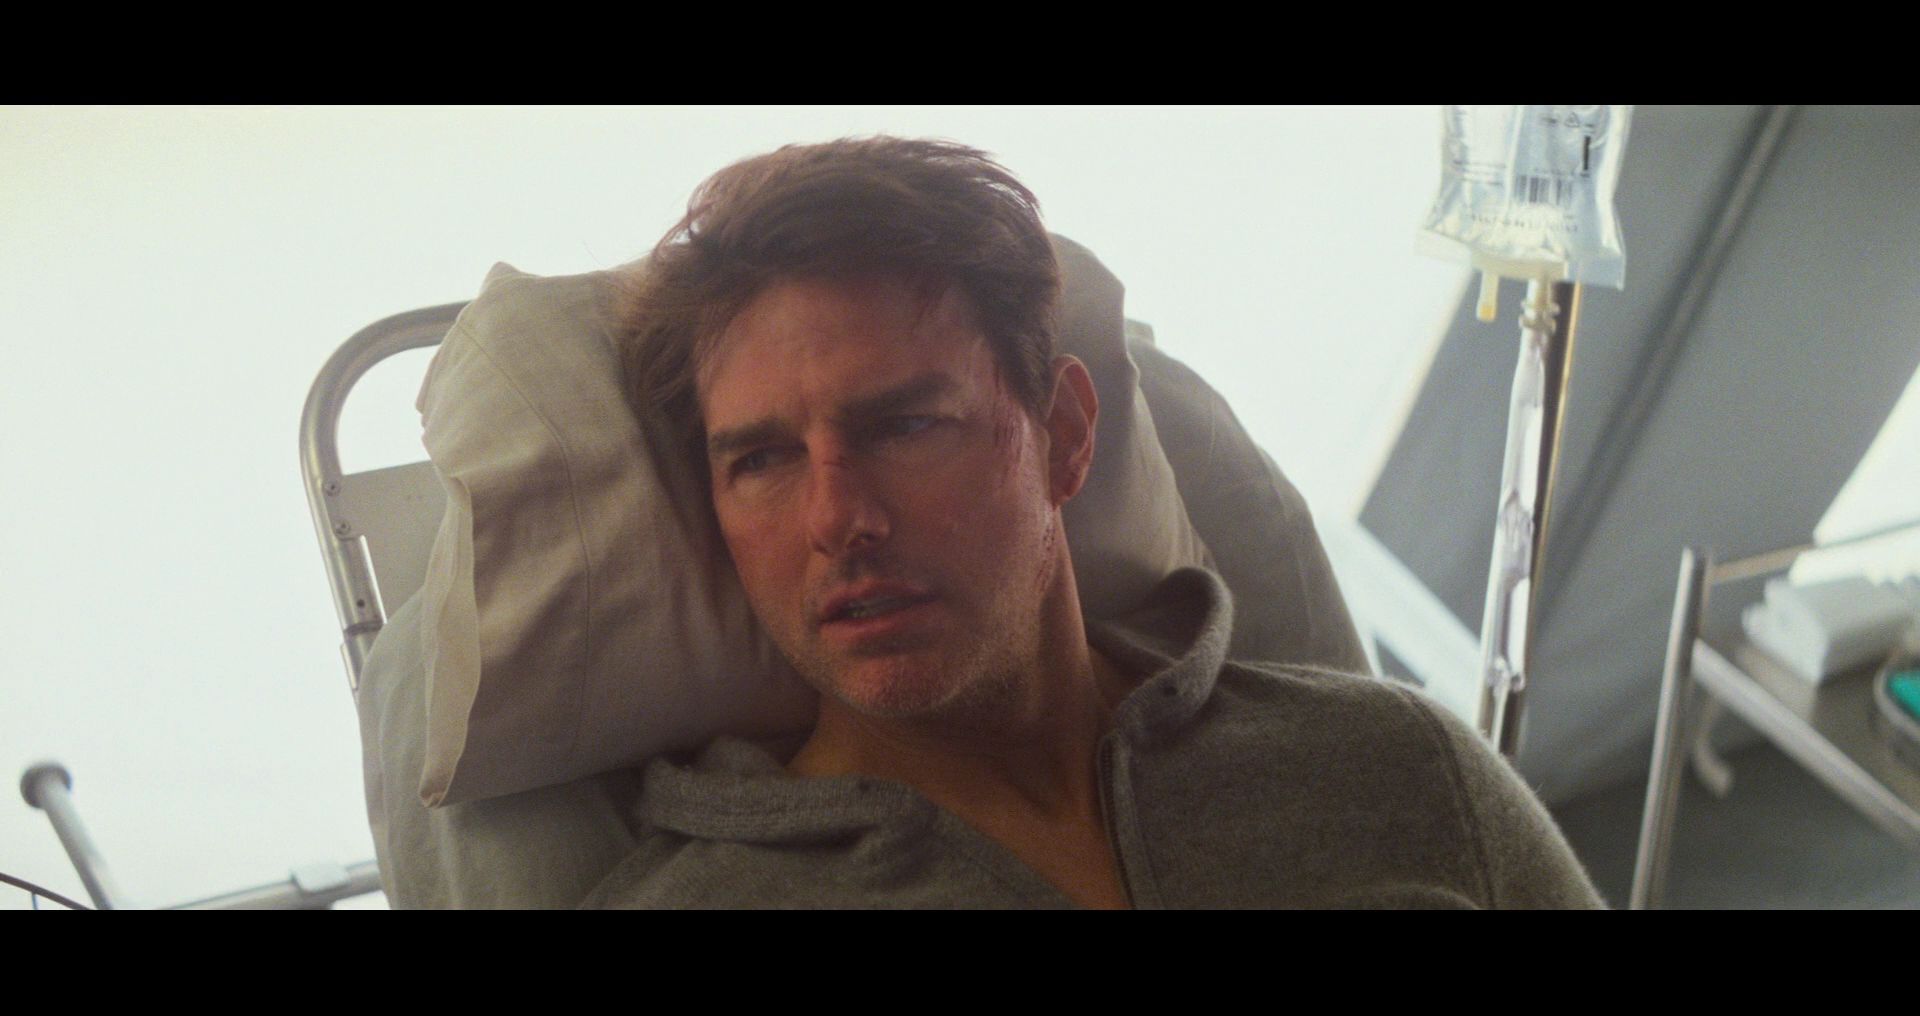 Mission-Impossible-Fallout-3913.jpg